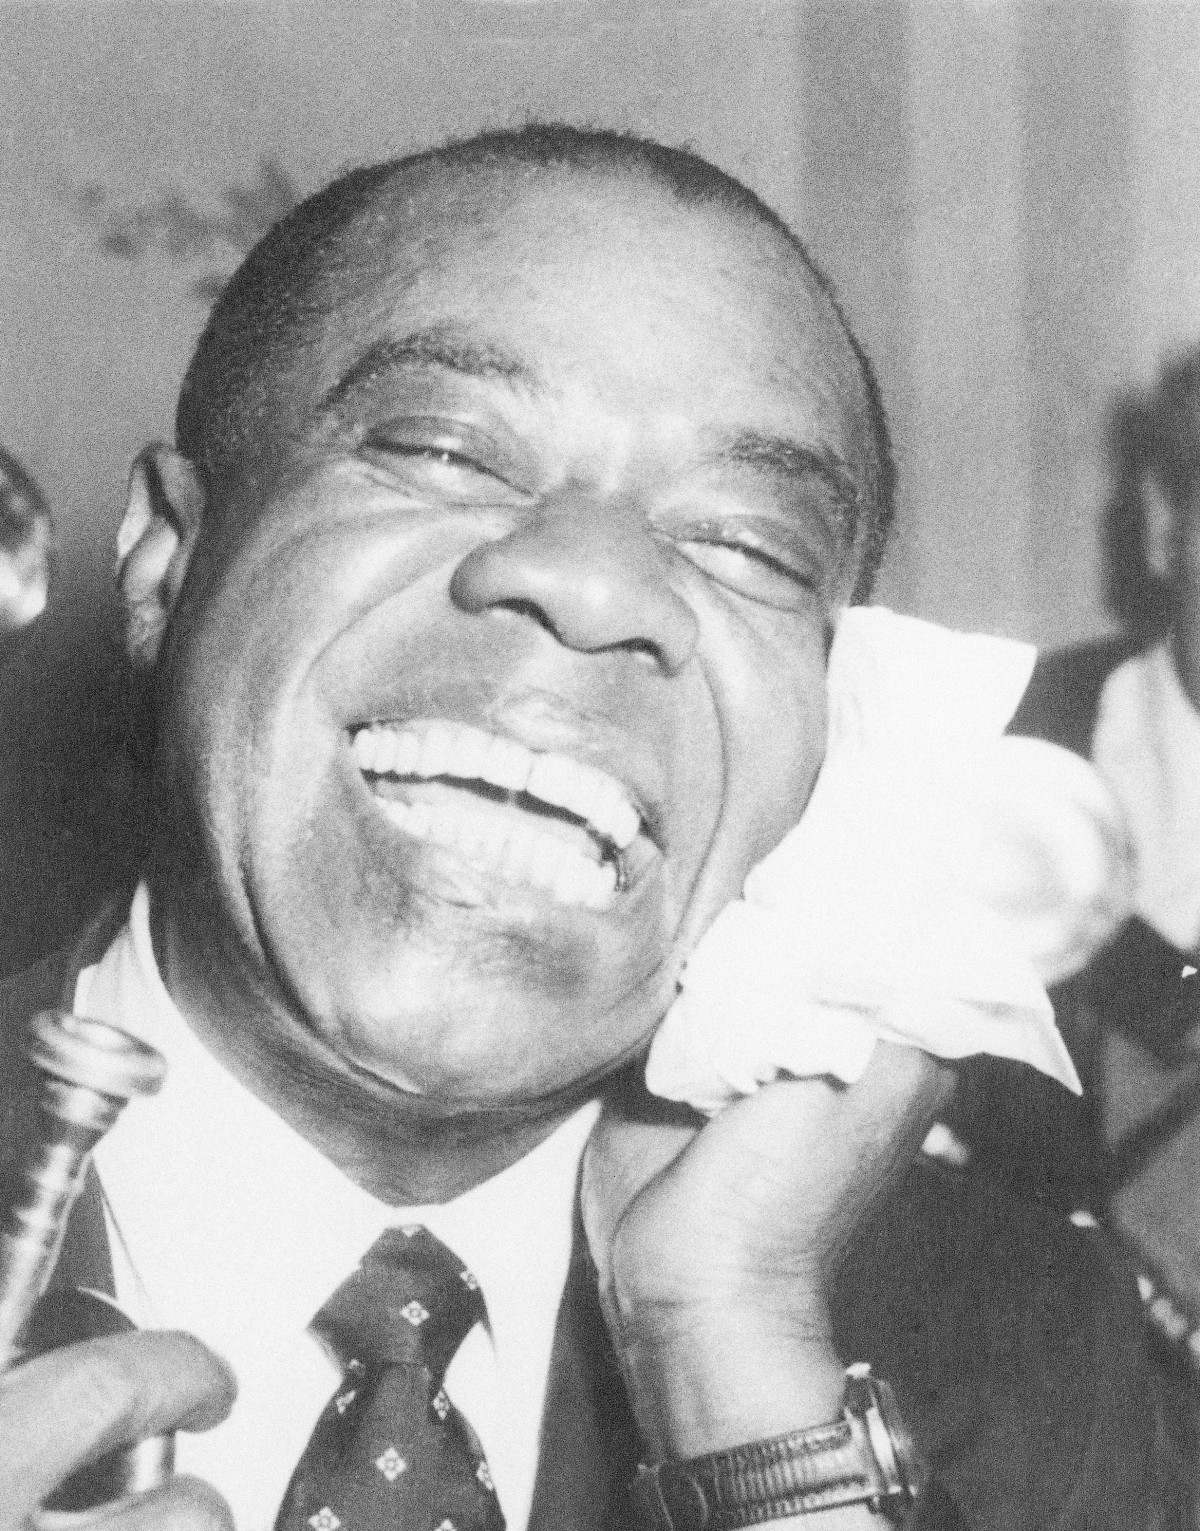 100 years ago, Louis Armstrong came to Chicago and changed music history